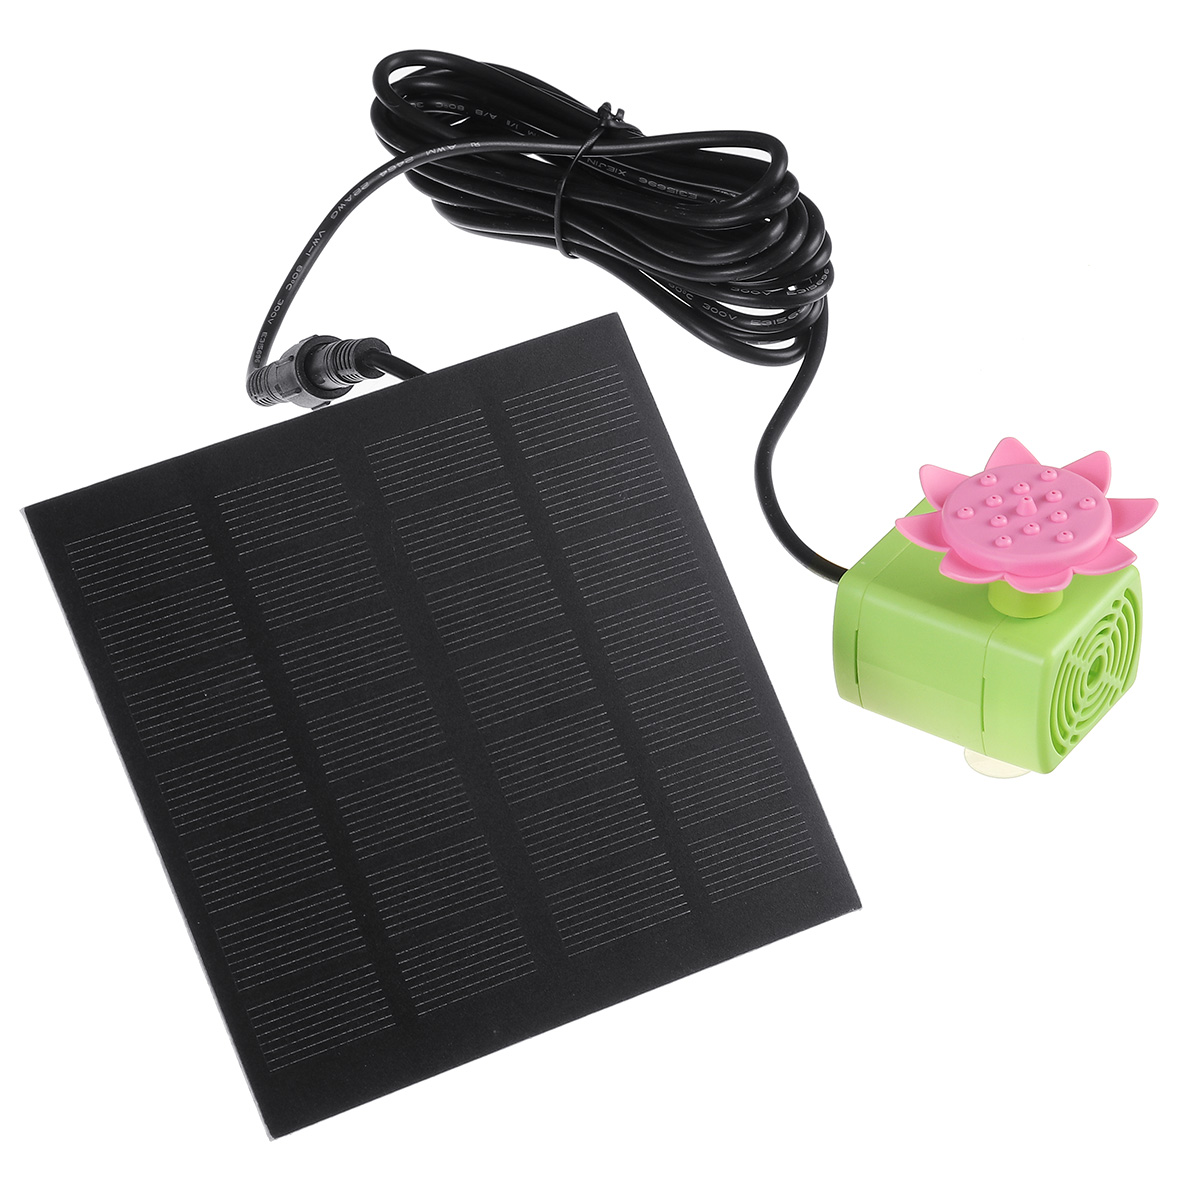 Find 7V 1 4W Solar Powered Water Fountain Pumps Floating Fountains Pump Waterproof Home Pond Garden Decor for Sale on Gipsybee.com with cryptocurrencies